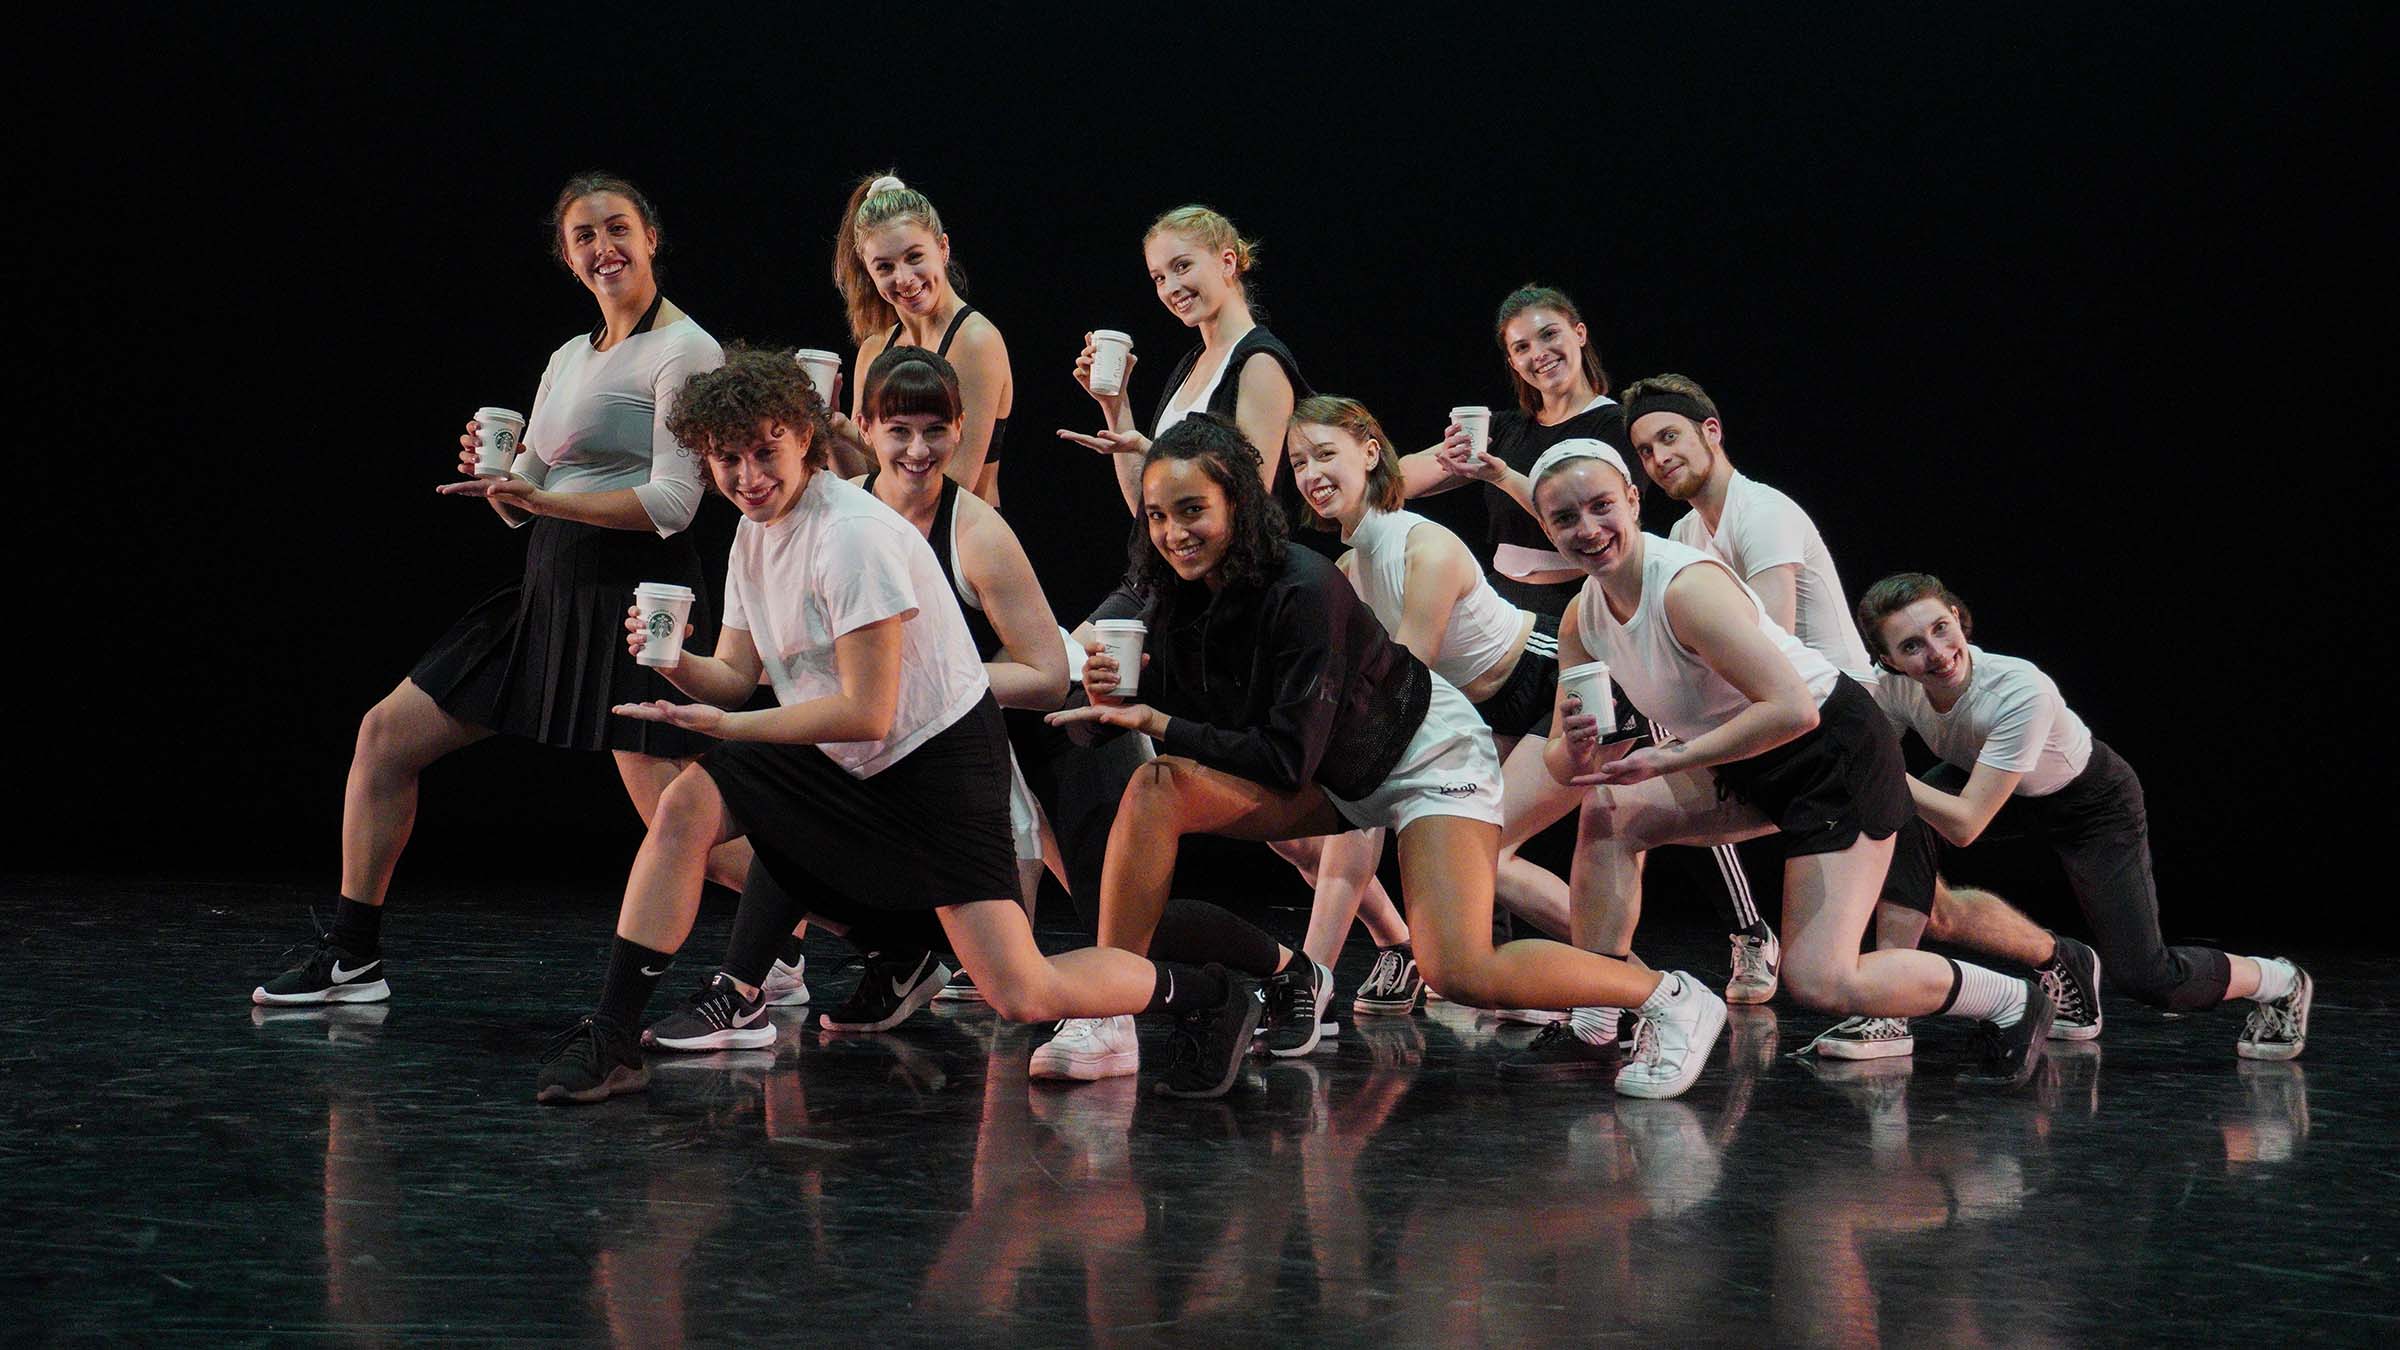 A group of dancers wearing casual clothing—mainly white shirts, black shorts, and sneakers—pose together while holding paper Starbucks coffee cups. Photo by Yesmina Townsley ’23